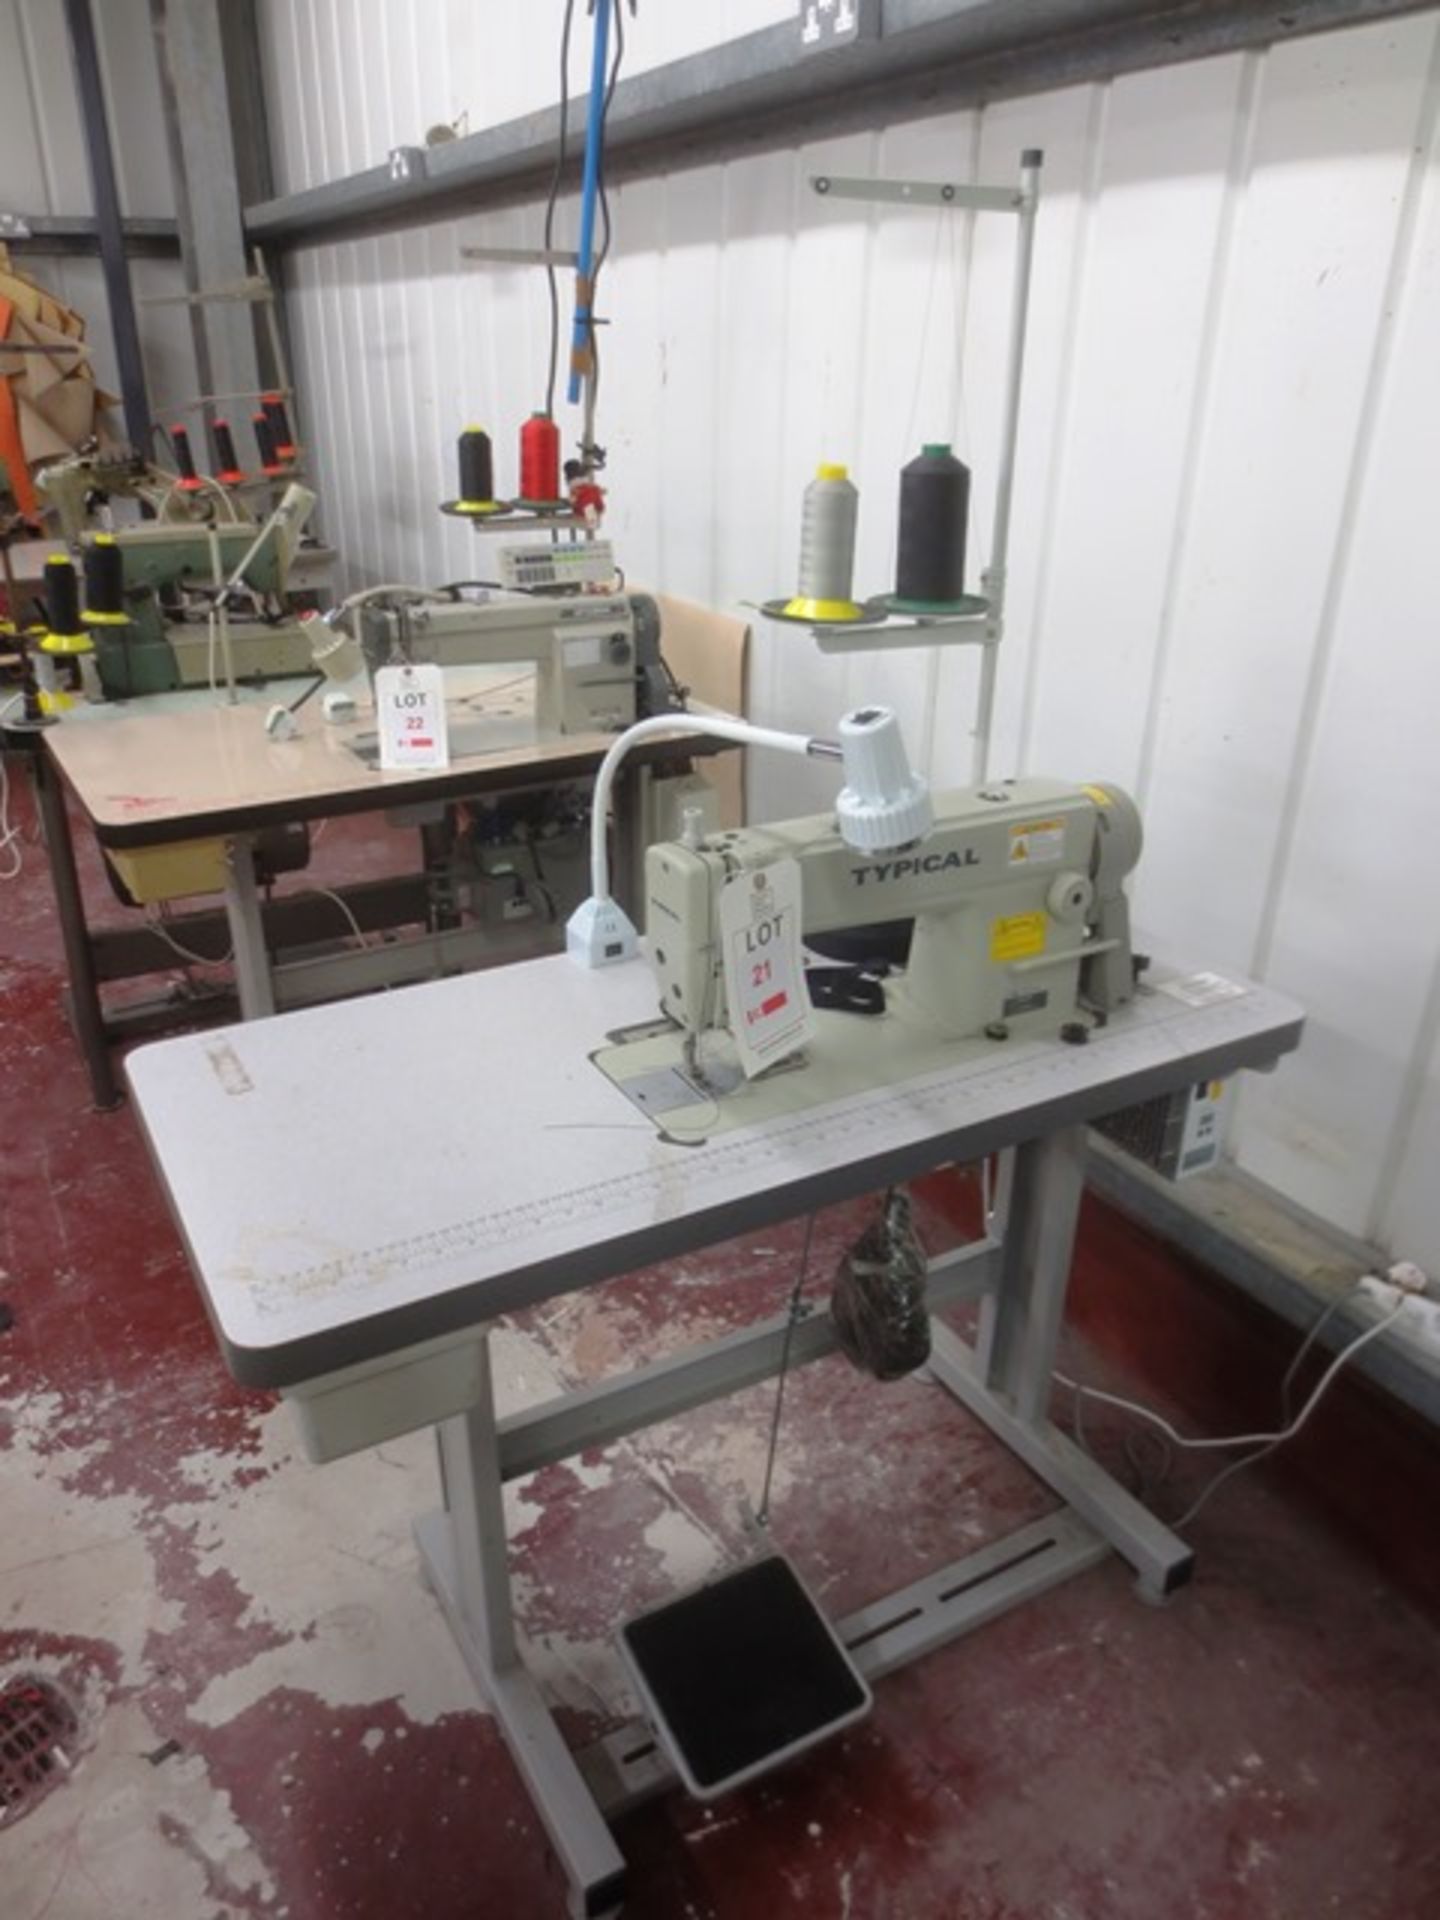 Typical GC6160 flat bed single needle sewing machine, serial no: 220300077, ZJTZ-LH control